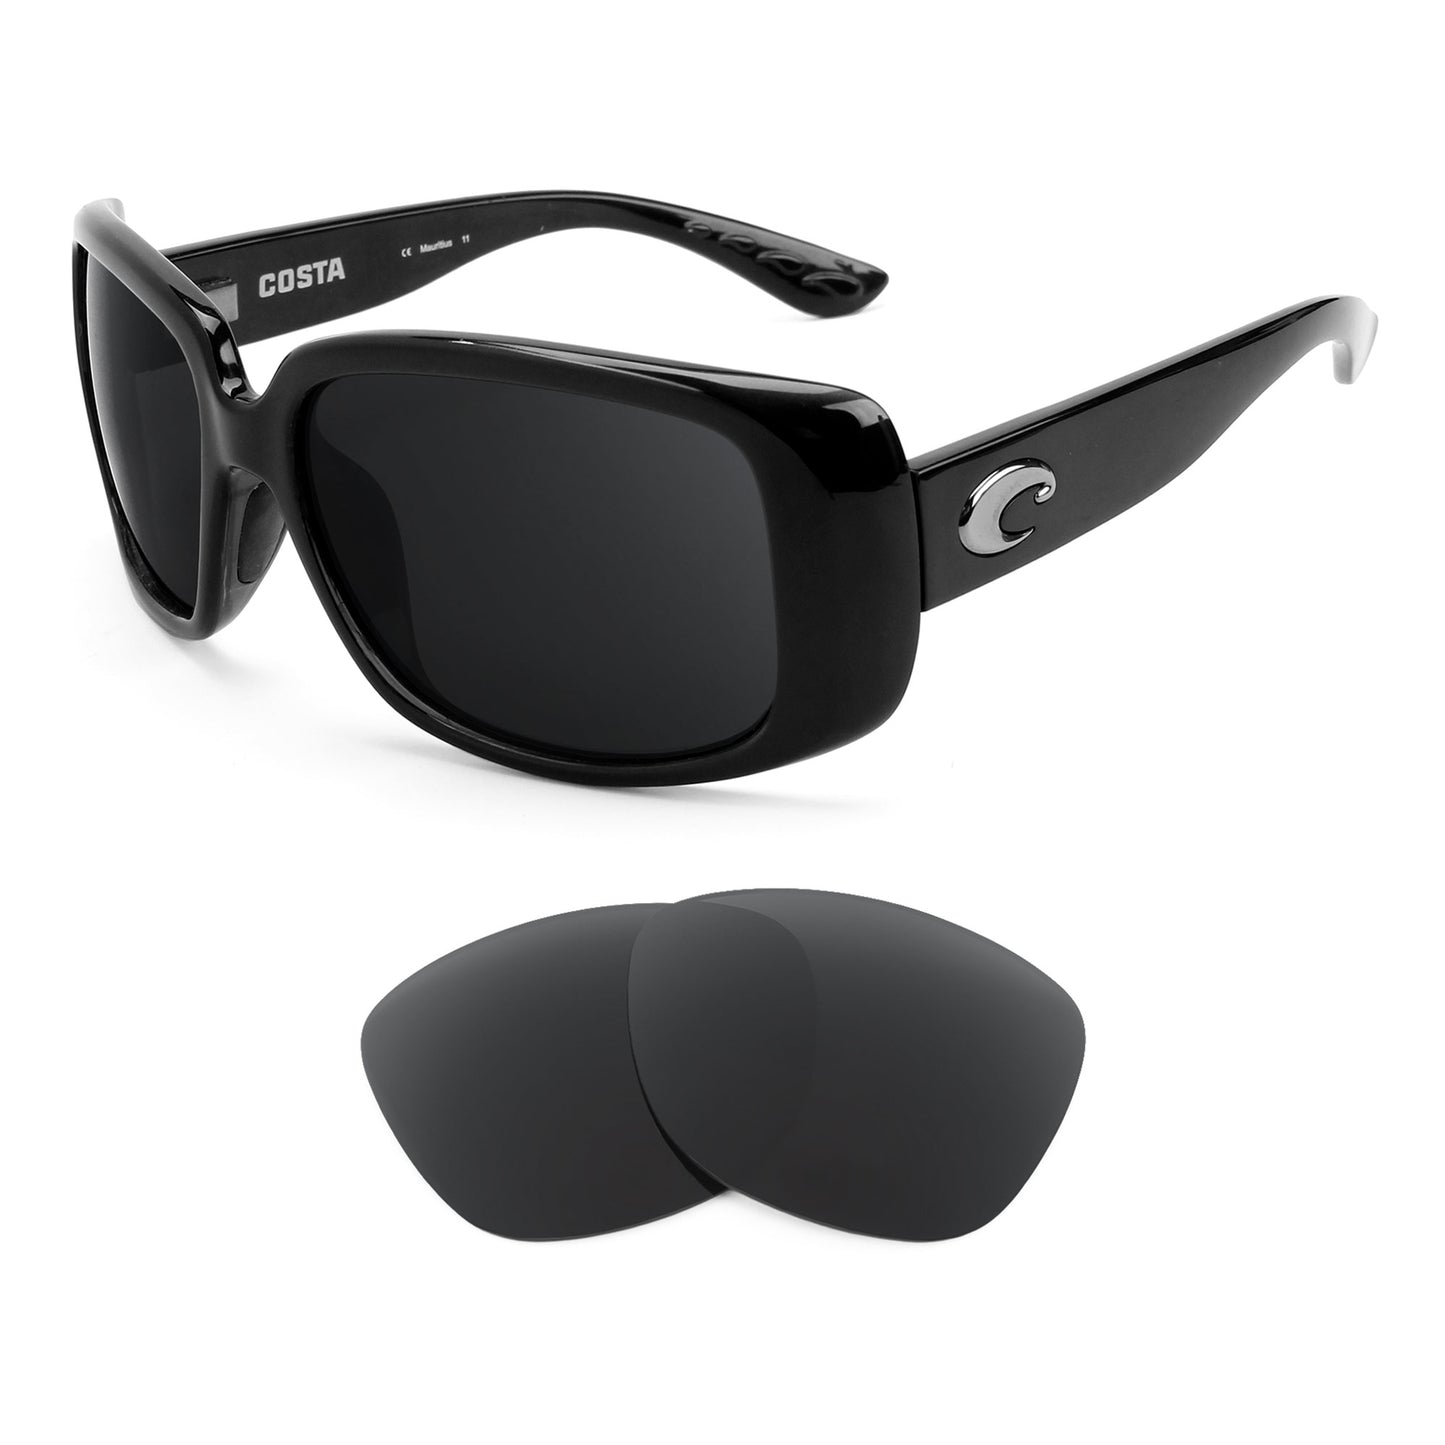 Costa Little Harbor sunglasses with replacement lenses